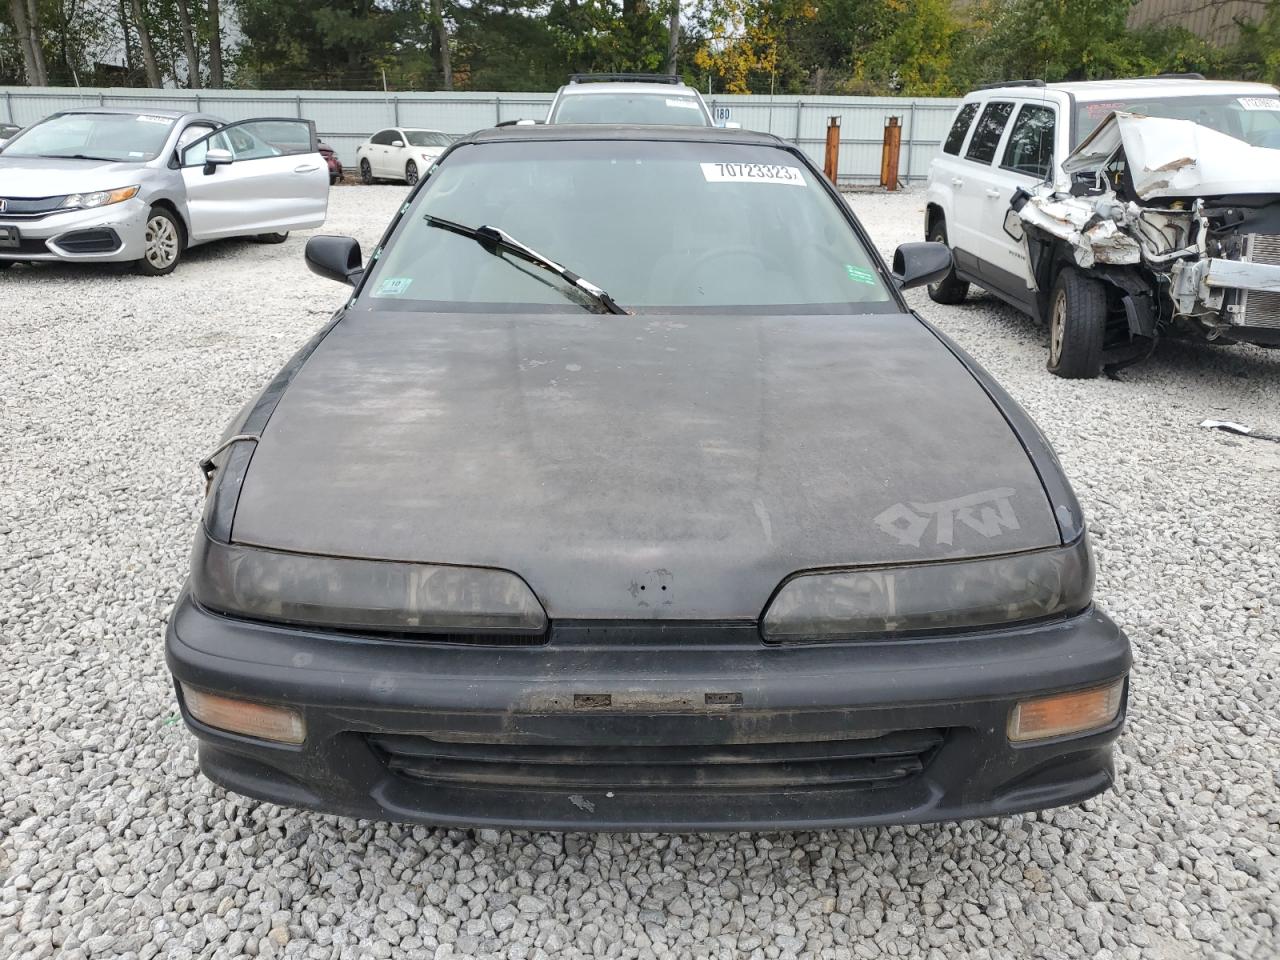 Buy 1993 Acura Integra Ls 1.8L JH4DA9354PS****** from USA Auctions 